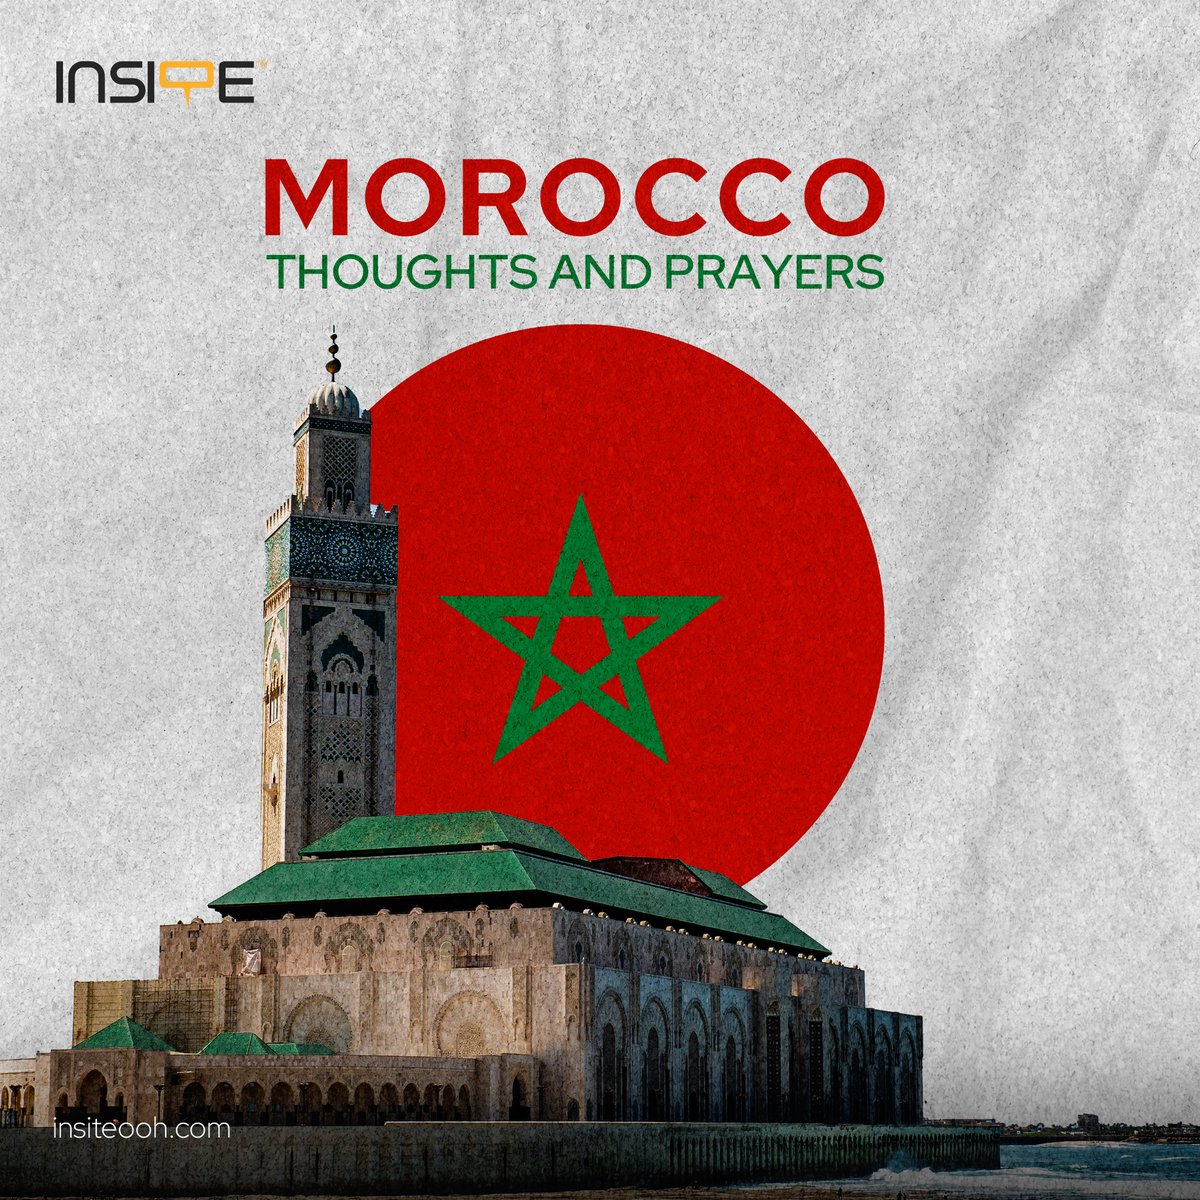 Our hearts are with the people of Morocco after the devastating earthquake. We offer our deepest condolences to the families and friends of those who lost their lives, and to all those who have been affected by this tragedy.
#MoroccoEarthquake
#WeStandWithMorocco